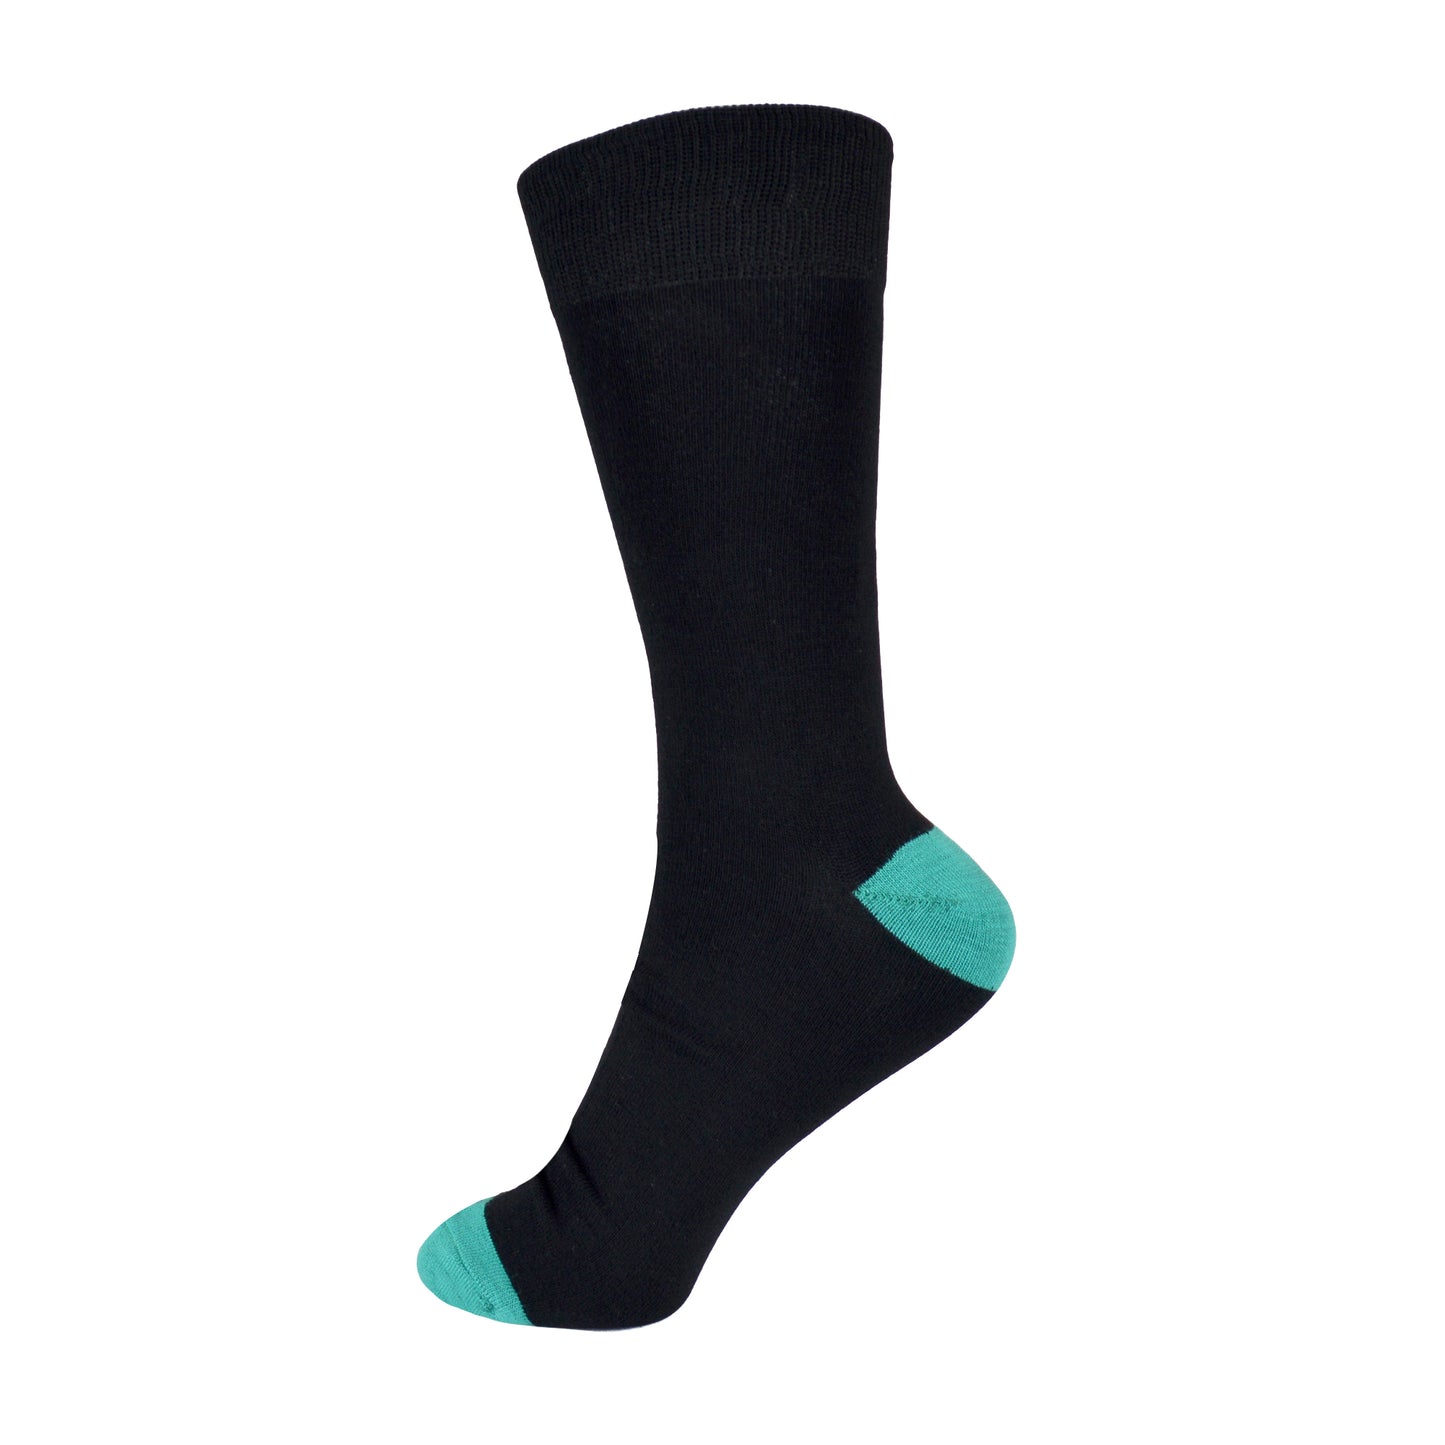 6 Pairs Men's Black Bamboo Socks with Coloured Heels and Toes